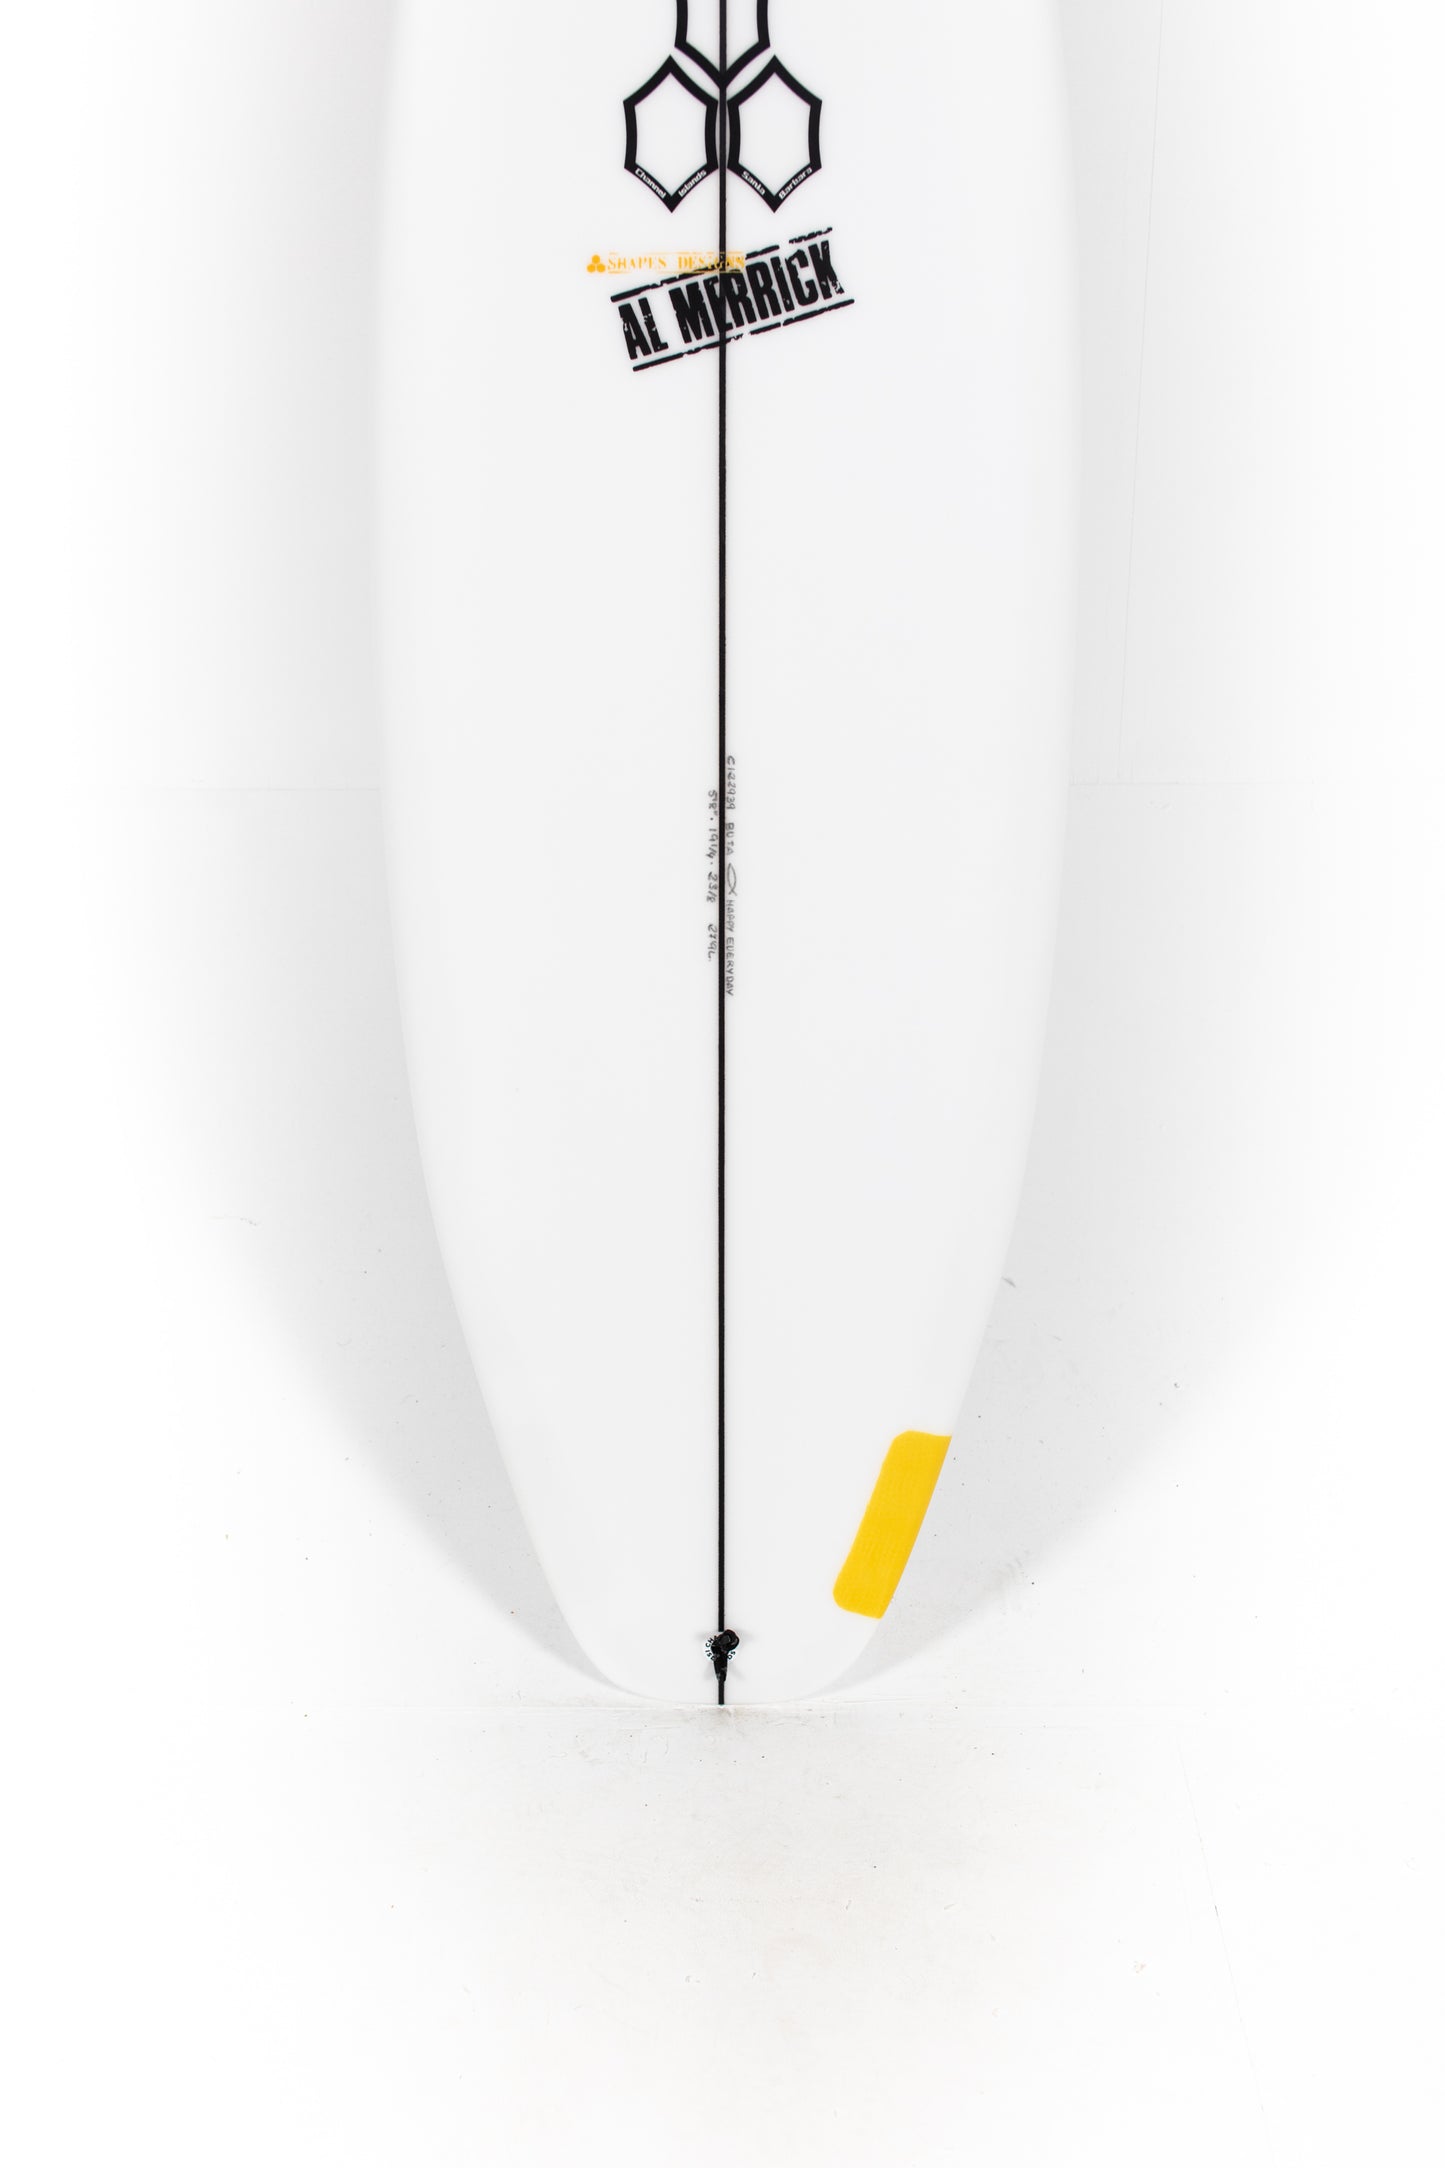 Channel Islands Surfboards | HAPPY EVERYDAY - shop at PUKAS SURF SHOP